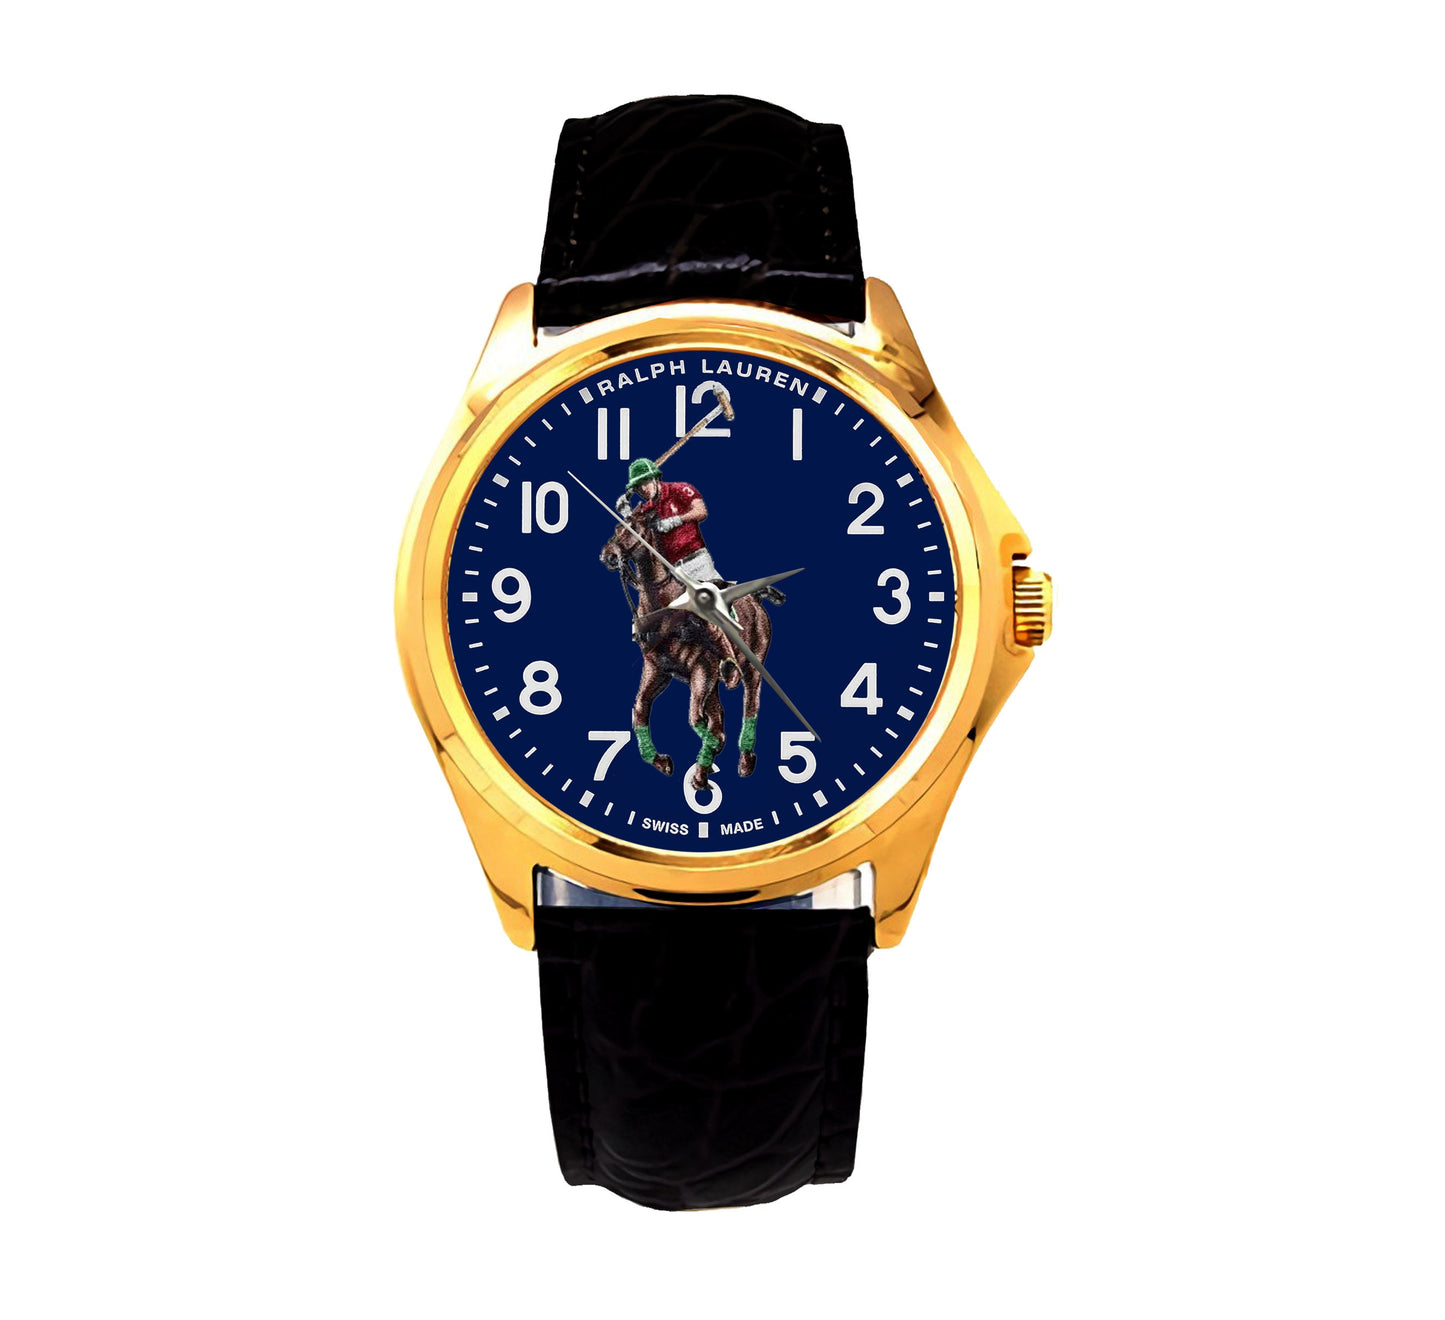 POLO Gallop In Watches PJ20